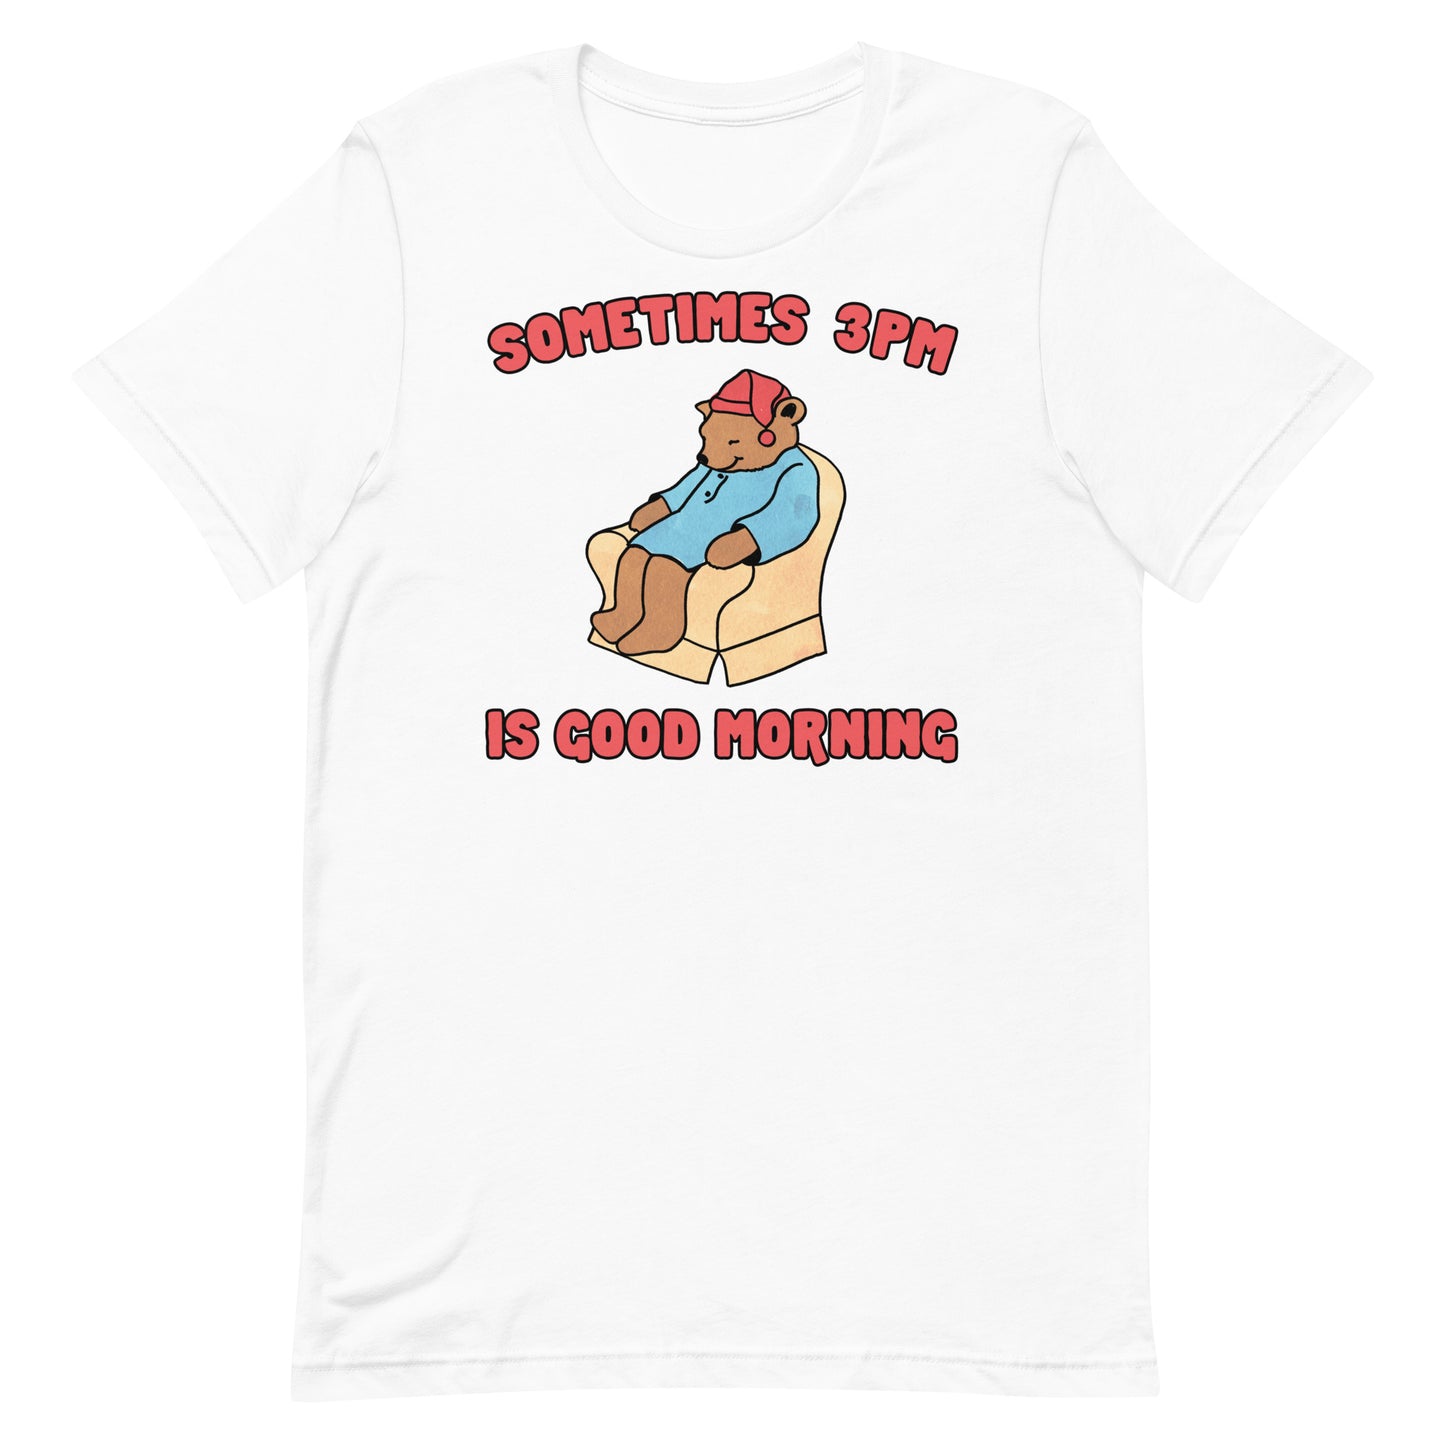 Sometimes 3PM Is Good Morning Unisex t-shirt